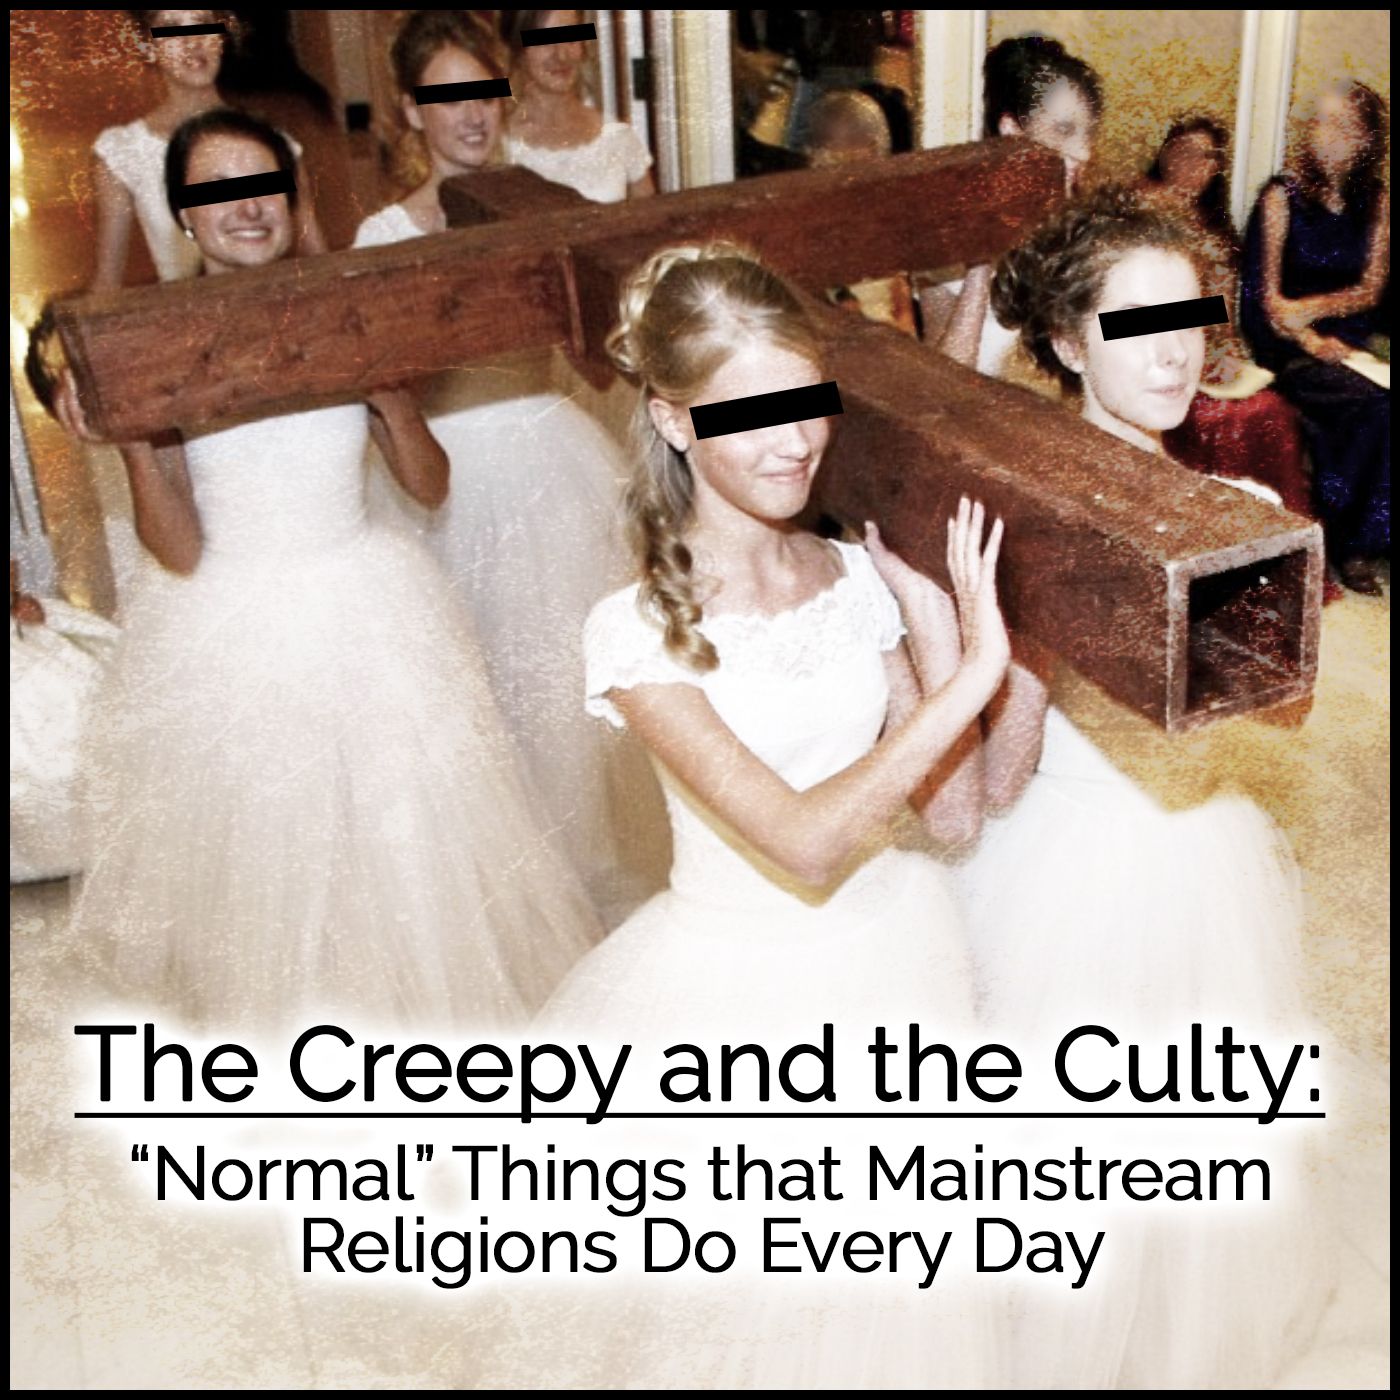 The Creepy and the Culty: ”Normal” Things that Mainstream Religions Do Every Day